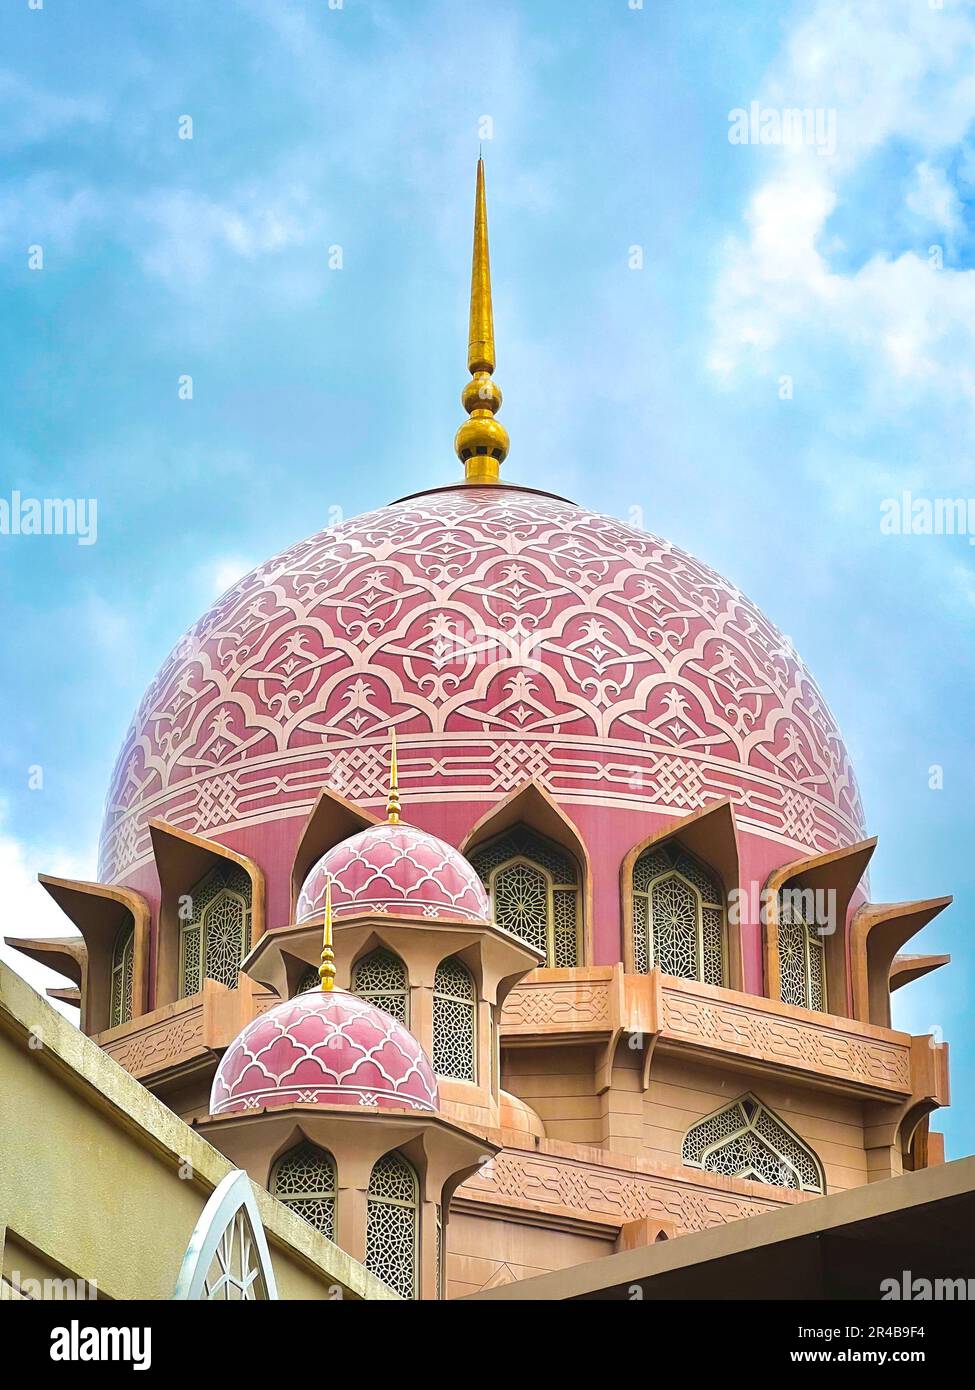 A pink-domed mosque stands out against a bright blue sky Stock Photo